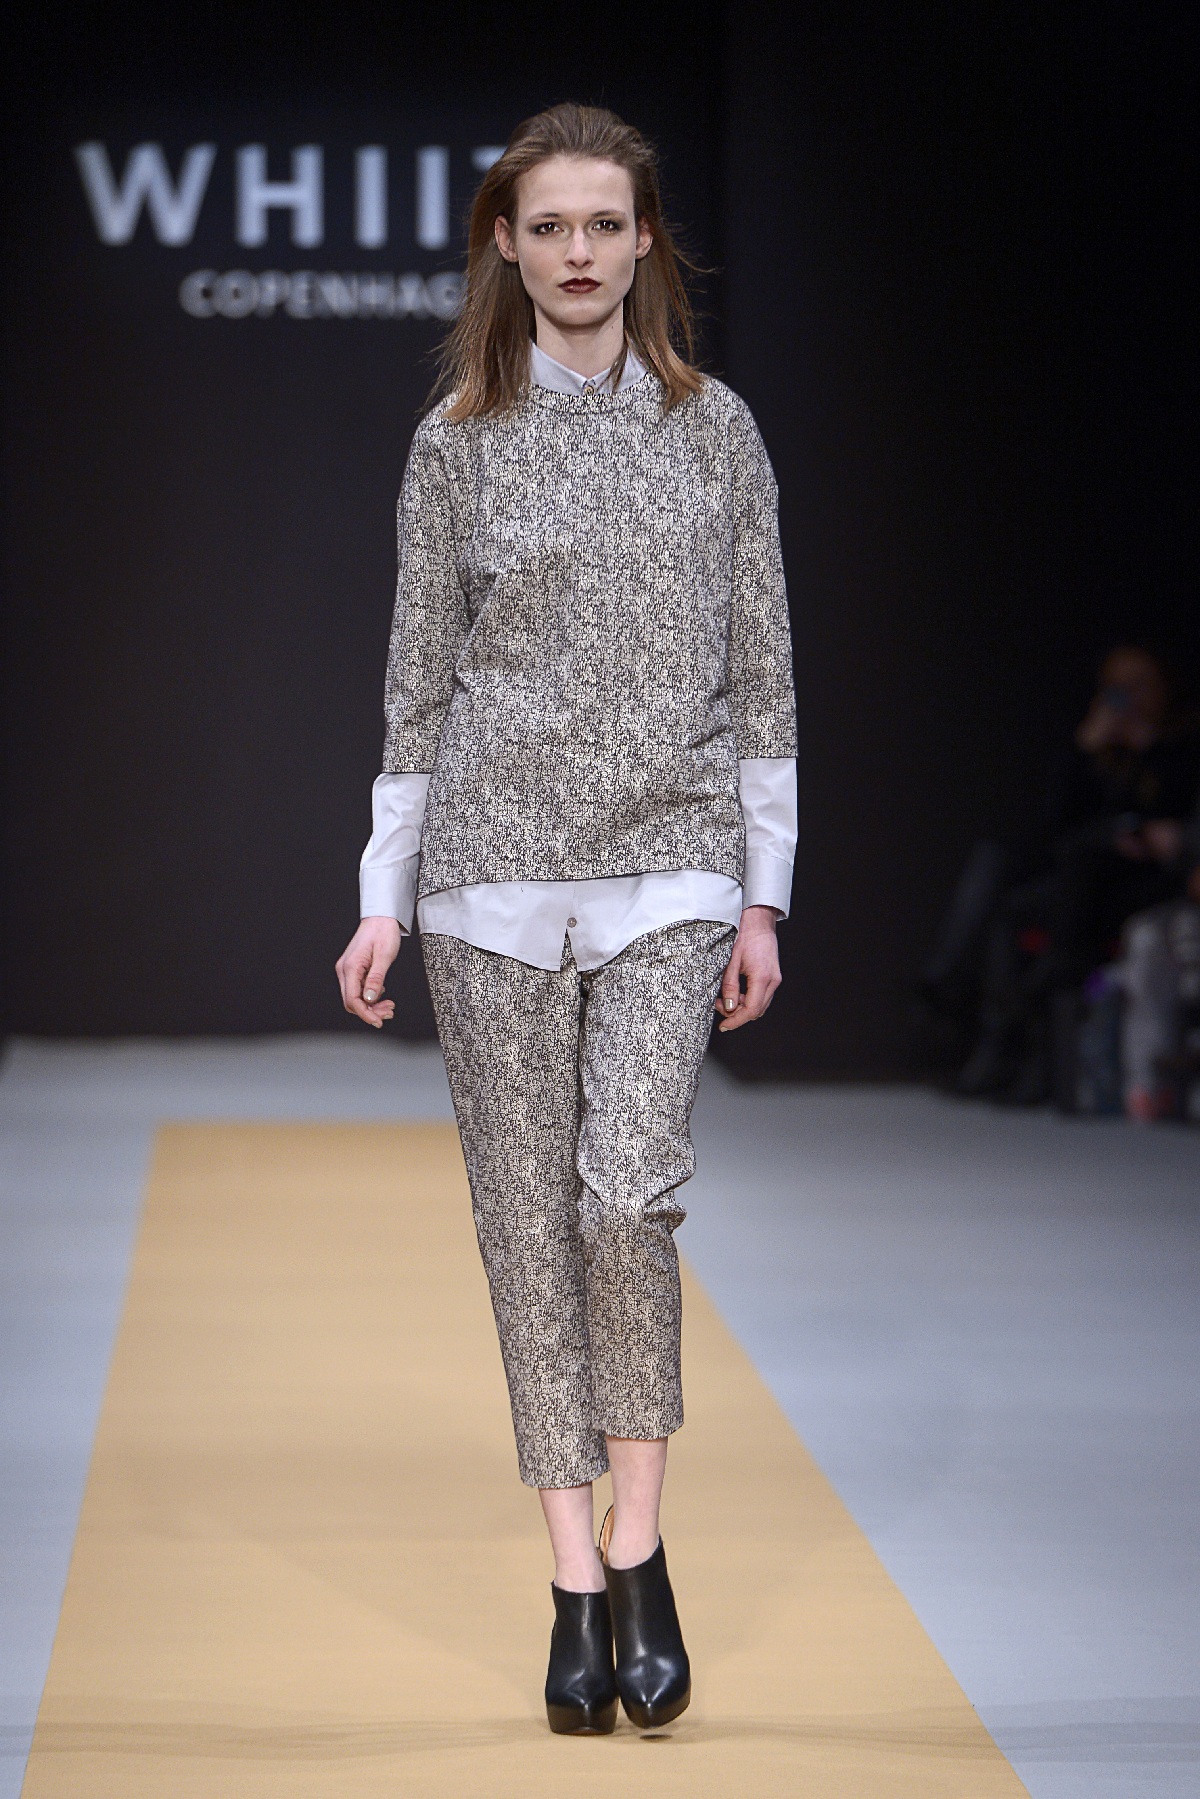 You are currently viewing Copenhagen Fashion Week: Whiite AW14